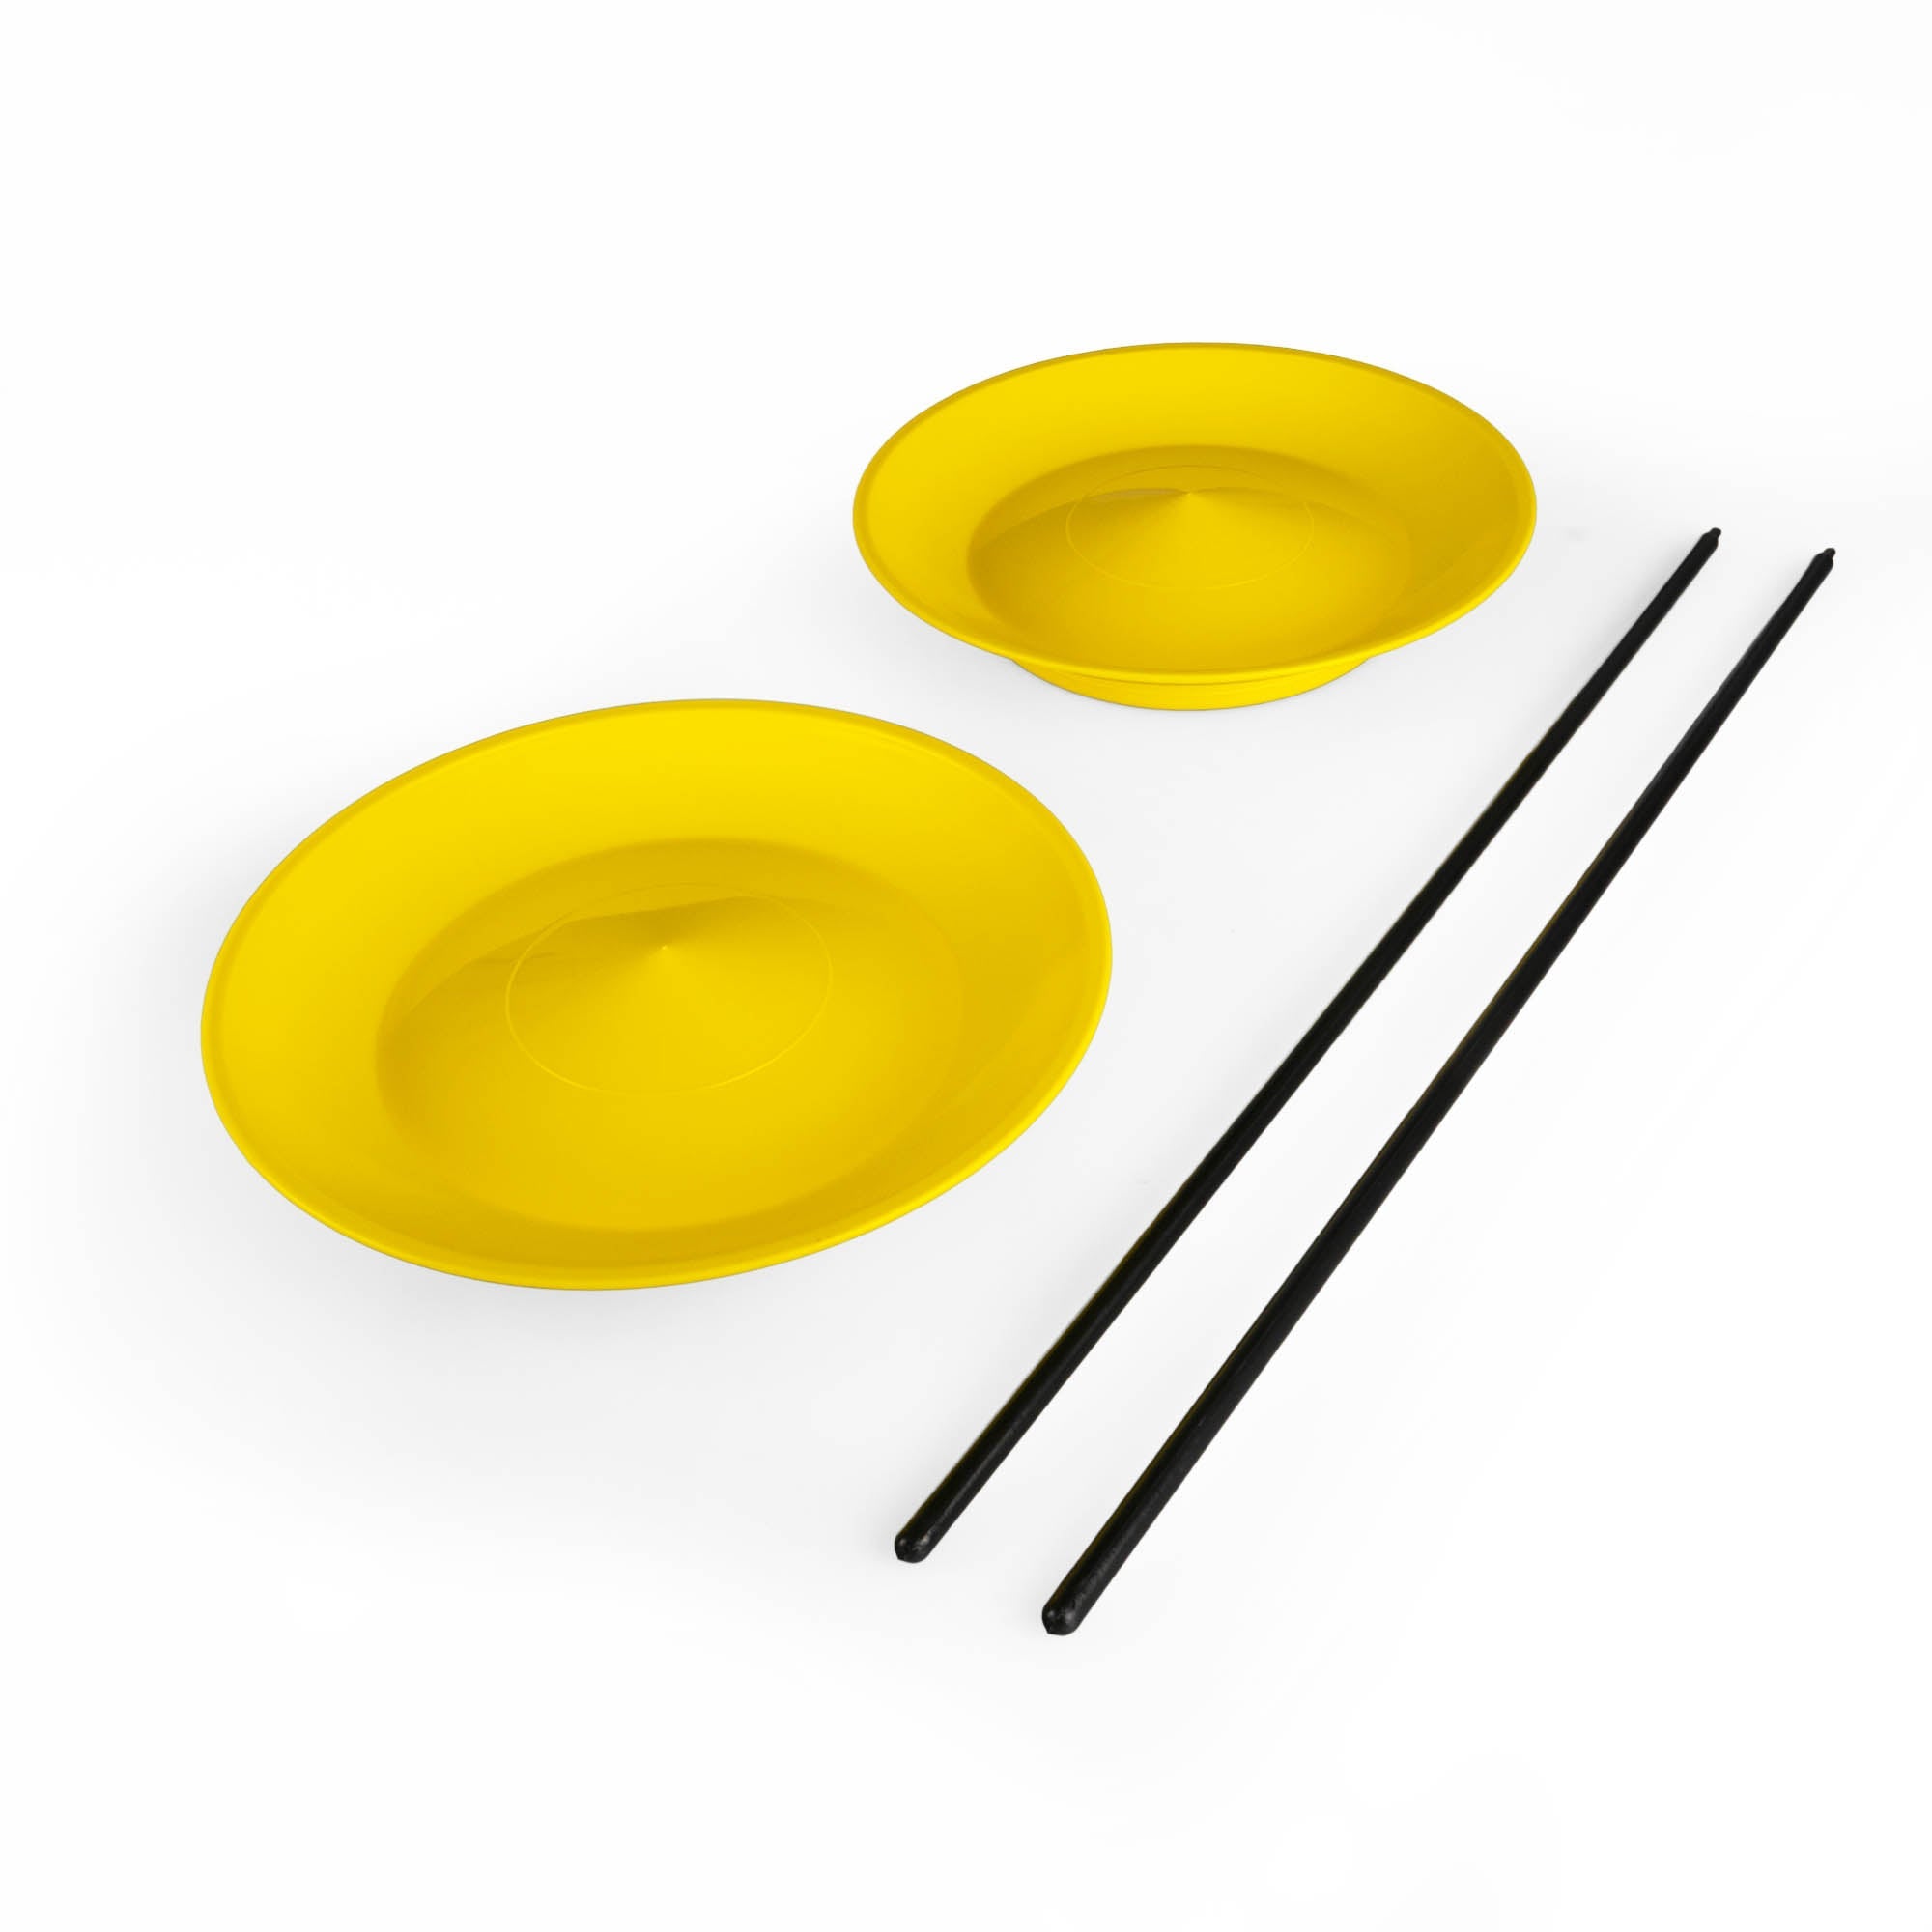 Status spinning plates 2 x yellow with 2 sticks at a slight angle